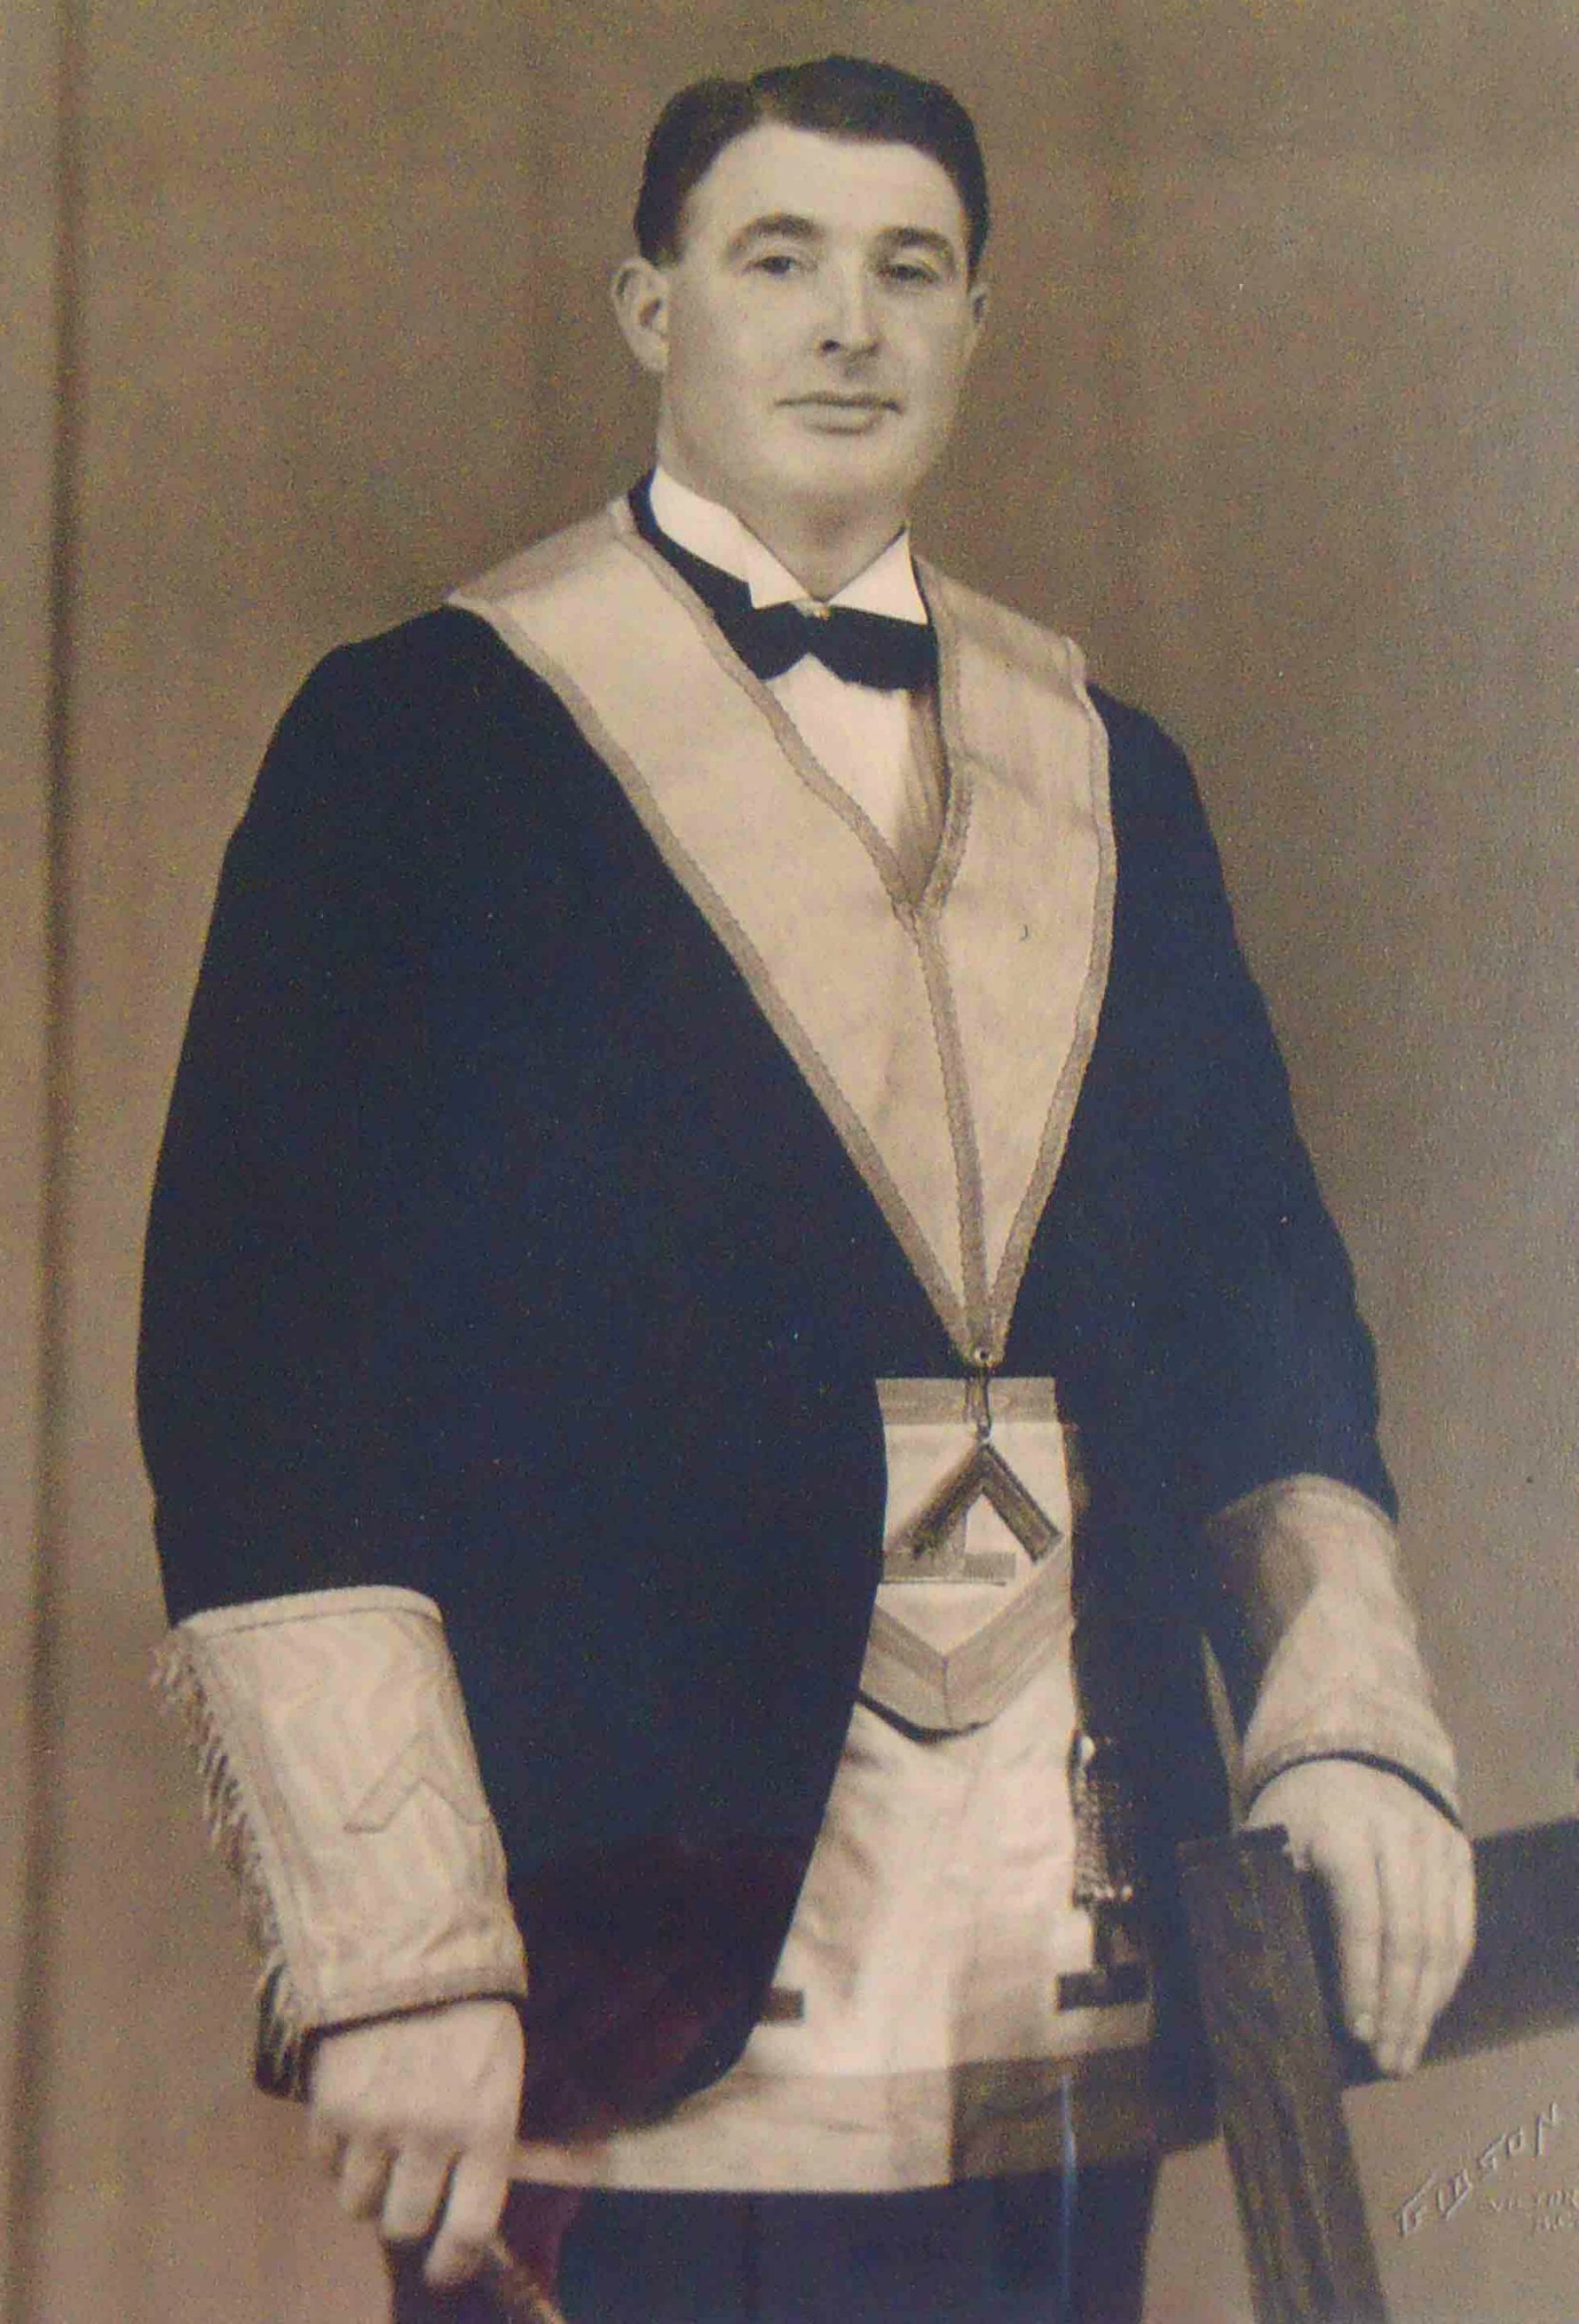 Claude Alfred John Green as Worshipful Master of Temple Lodge, No.33 in 1941